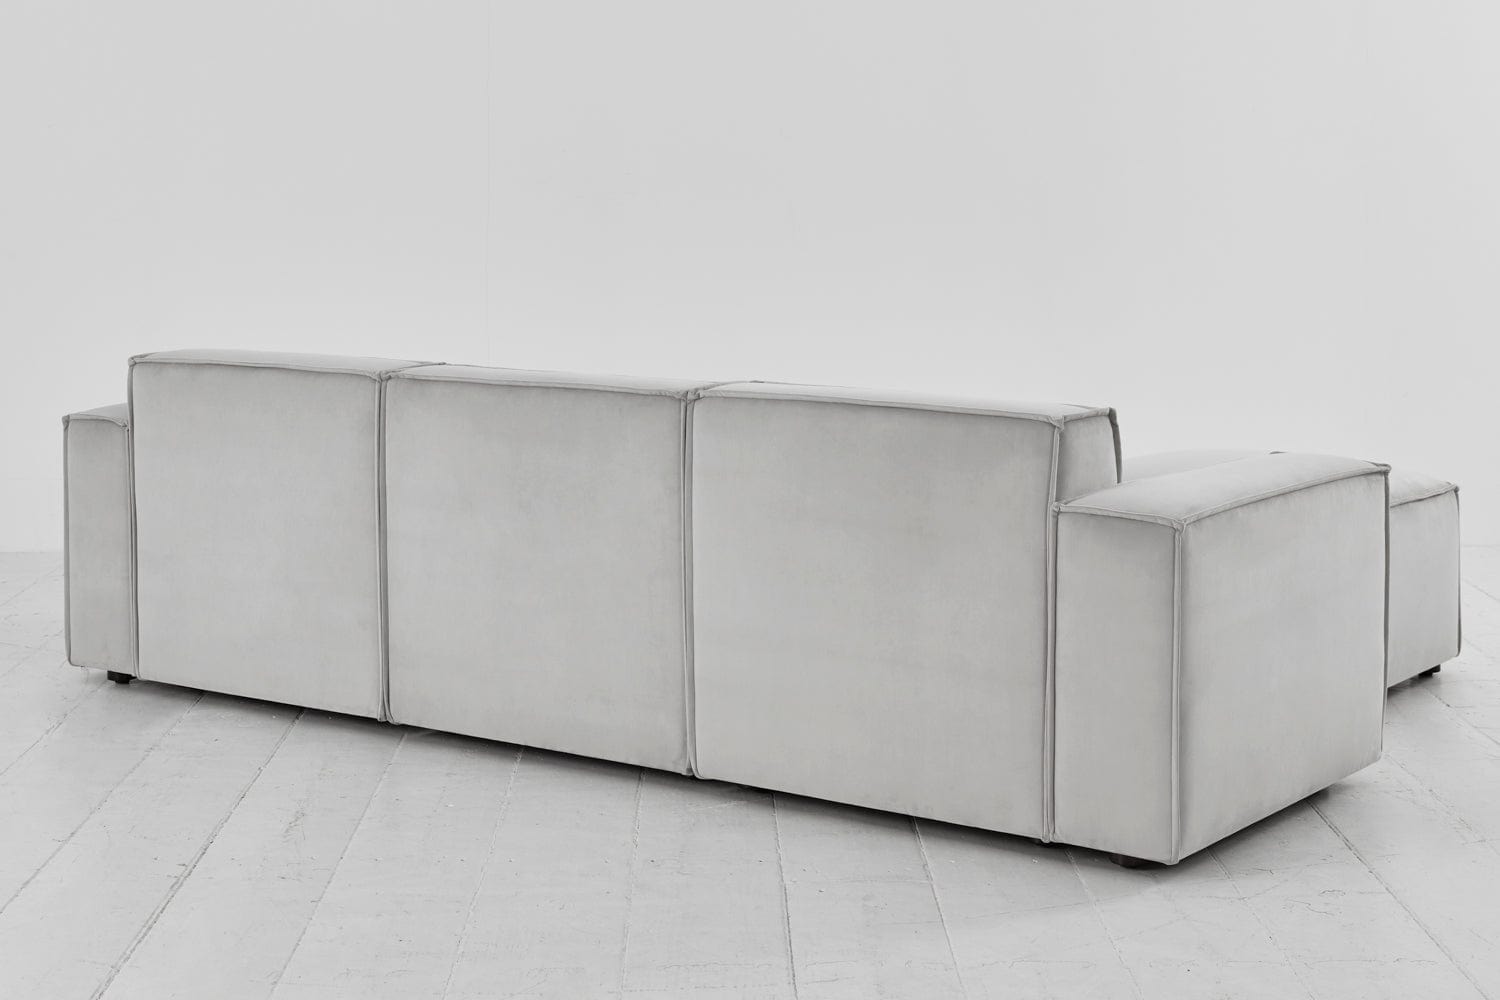 Swyft Model 03 3 Seater Sofa - MADE TO ORDER